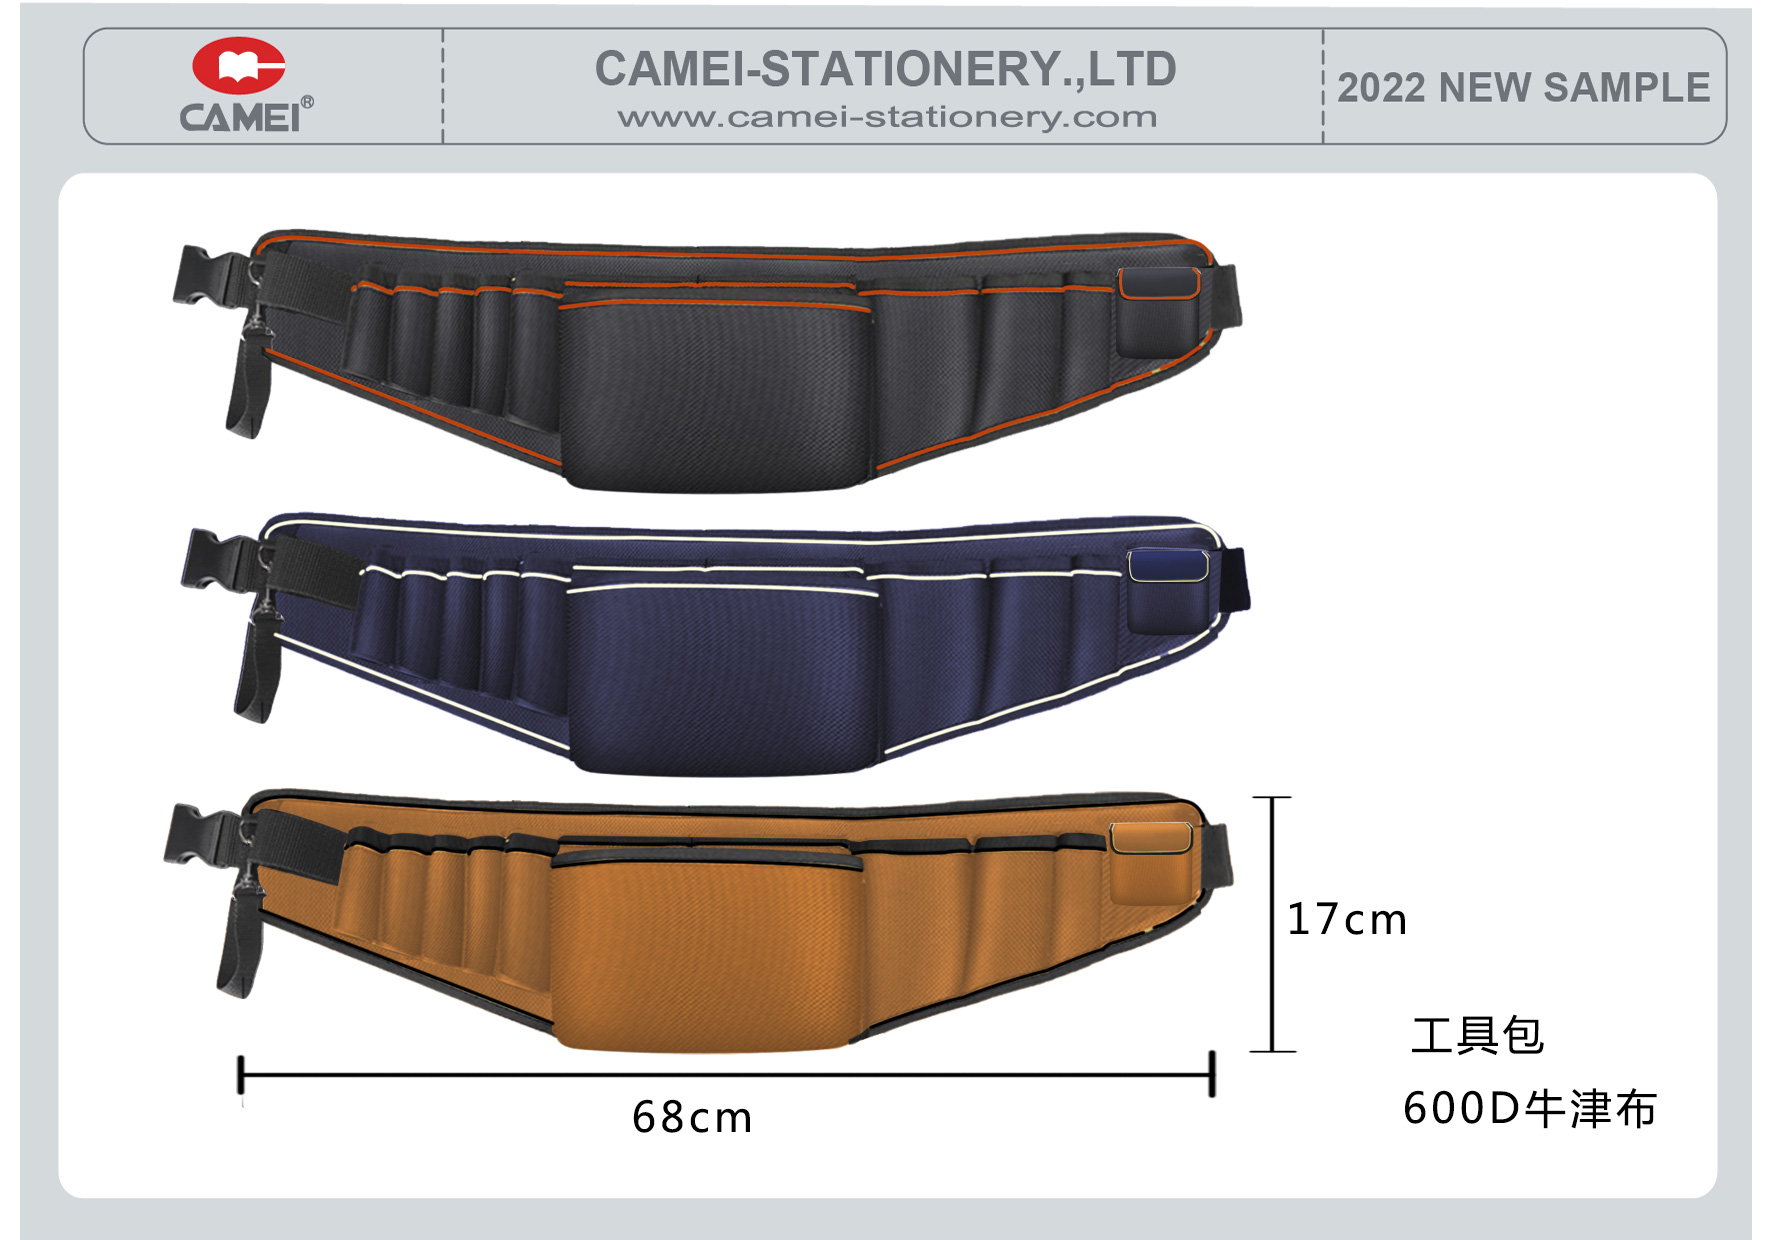 Fashion heavy duty 600D oxford tool bag belt multi compartments of different sizes and depth gardening apron waist bag